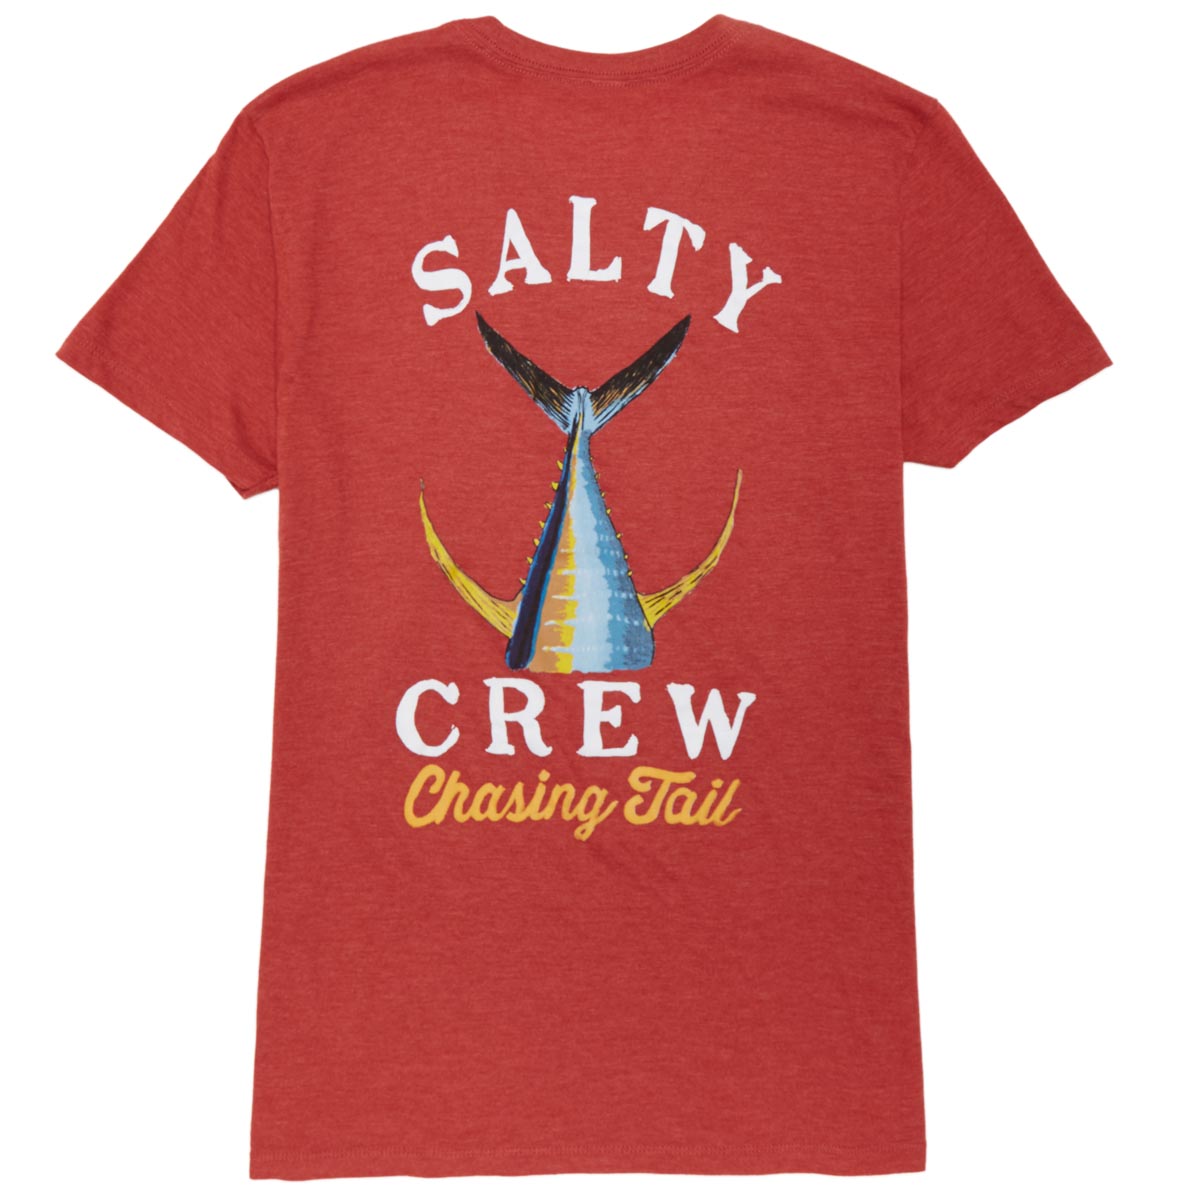 Salty Crew Tailed Classic T-Shirt - Salmon Heather image 1